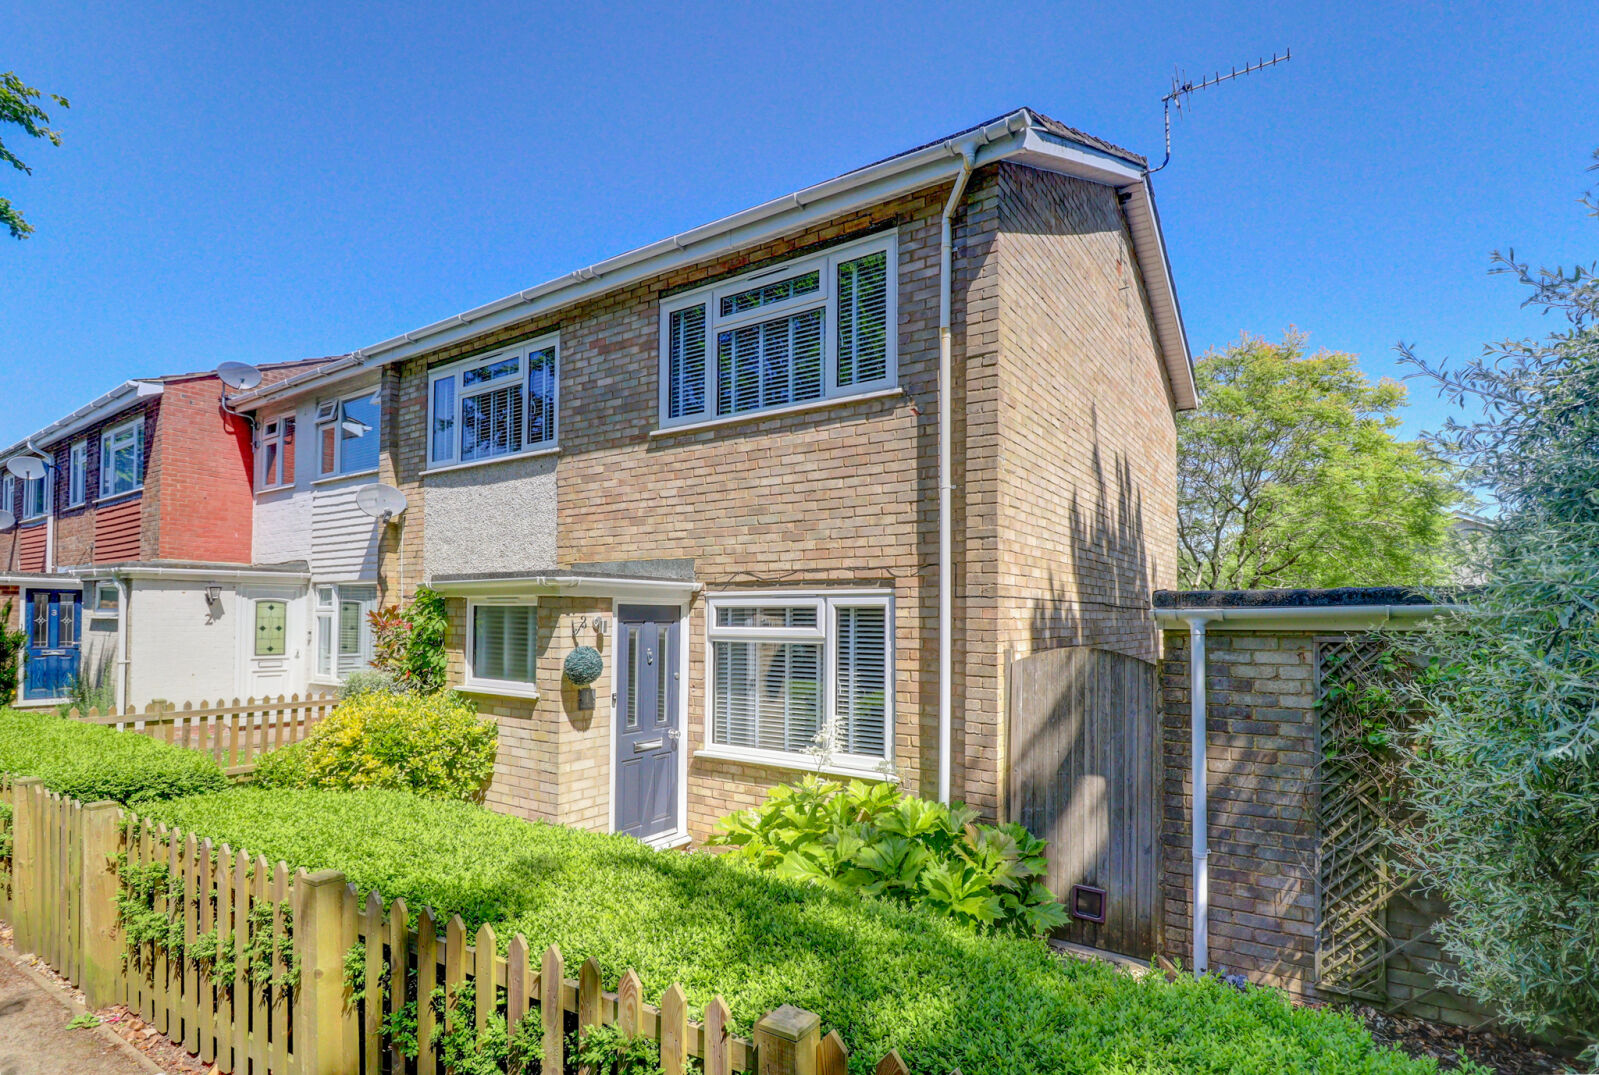 3 bedroom end terraced house for sale Yew Walk, High Wycombe, HP15, main image